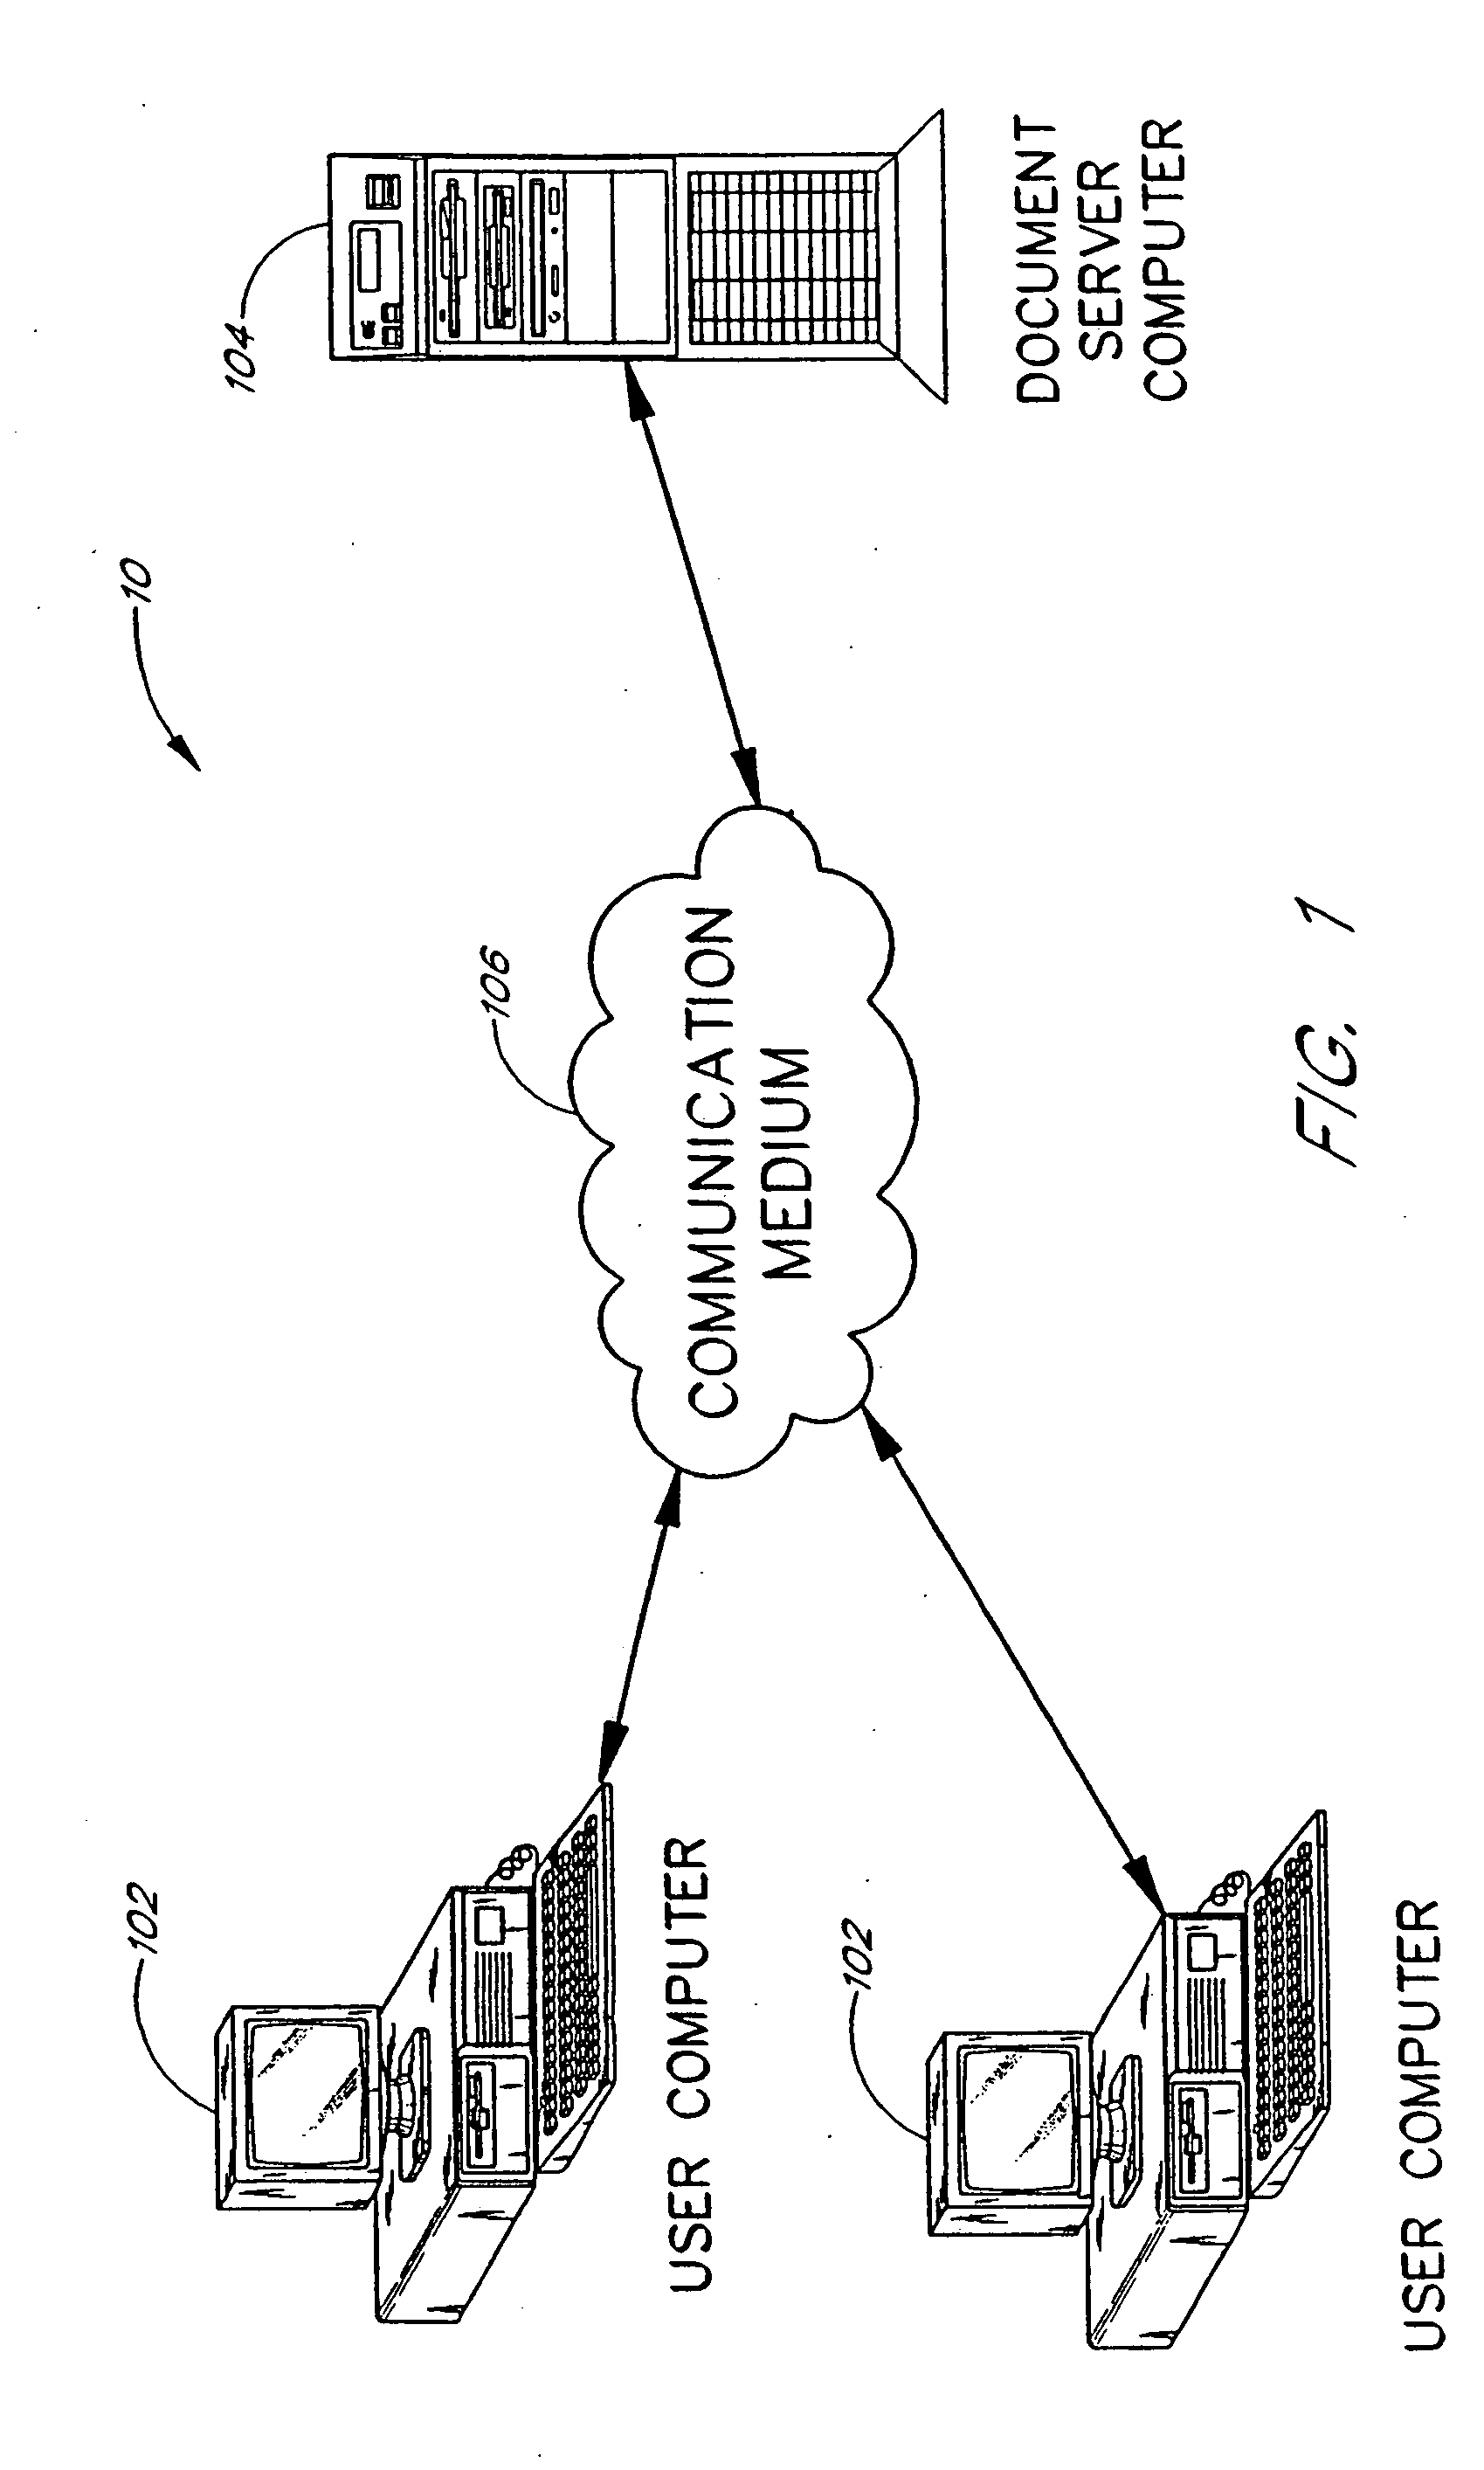 Hierarchical document cross-reference system and method